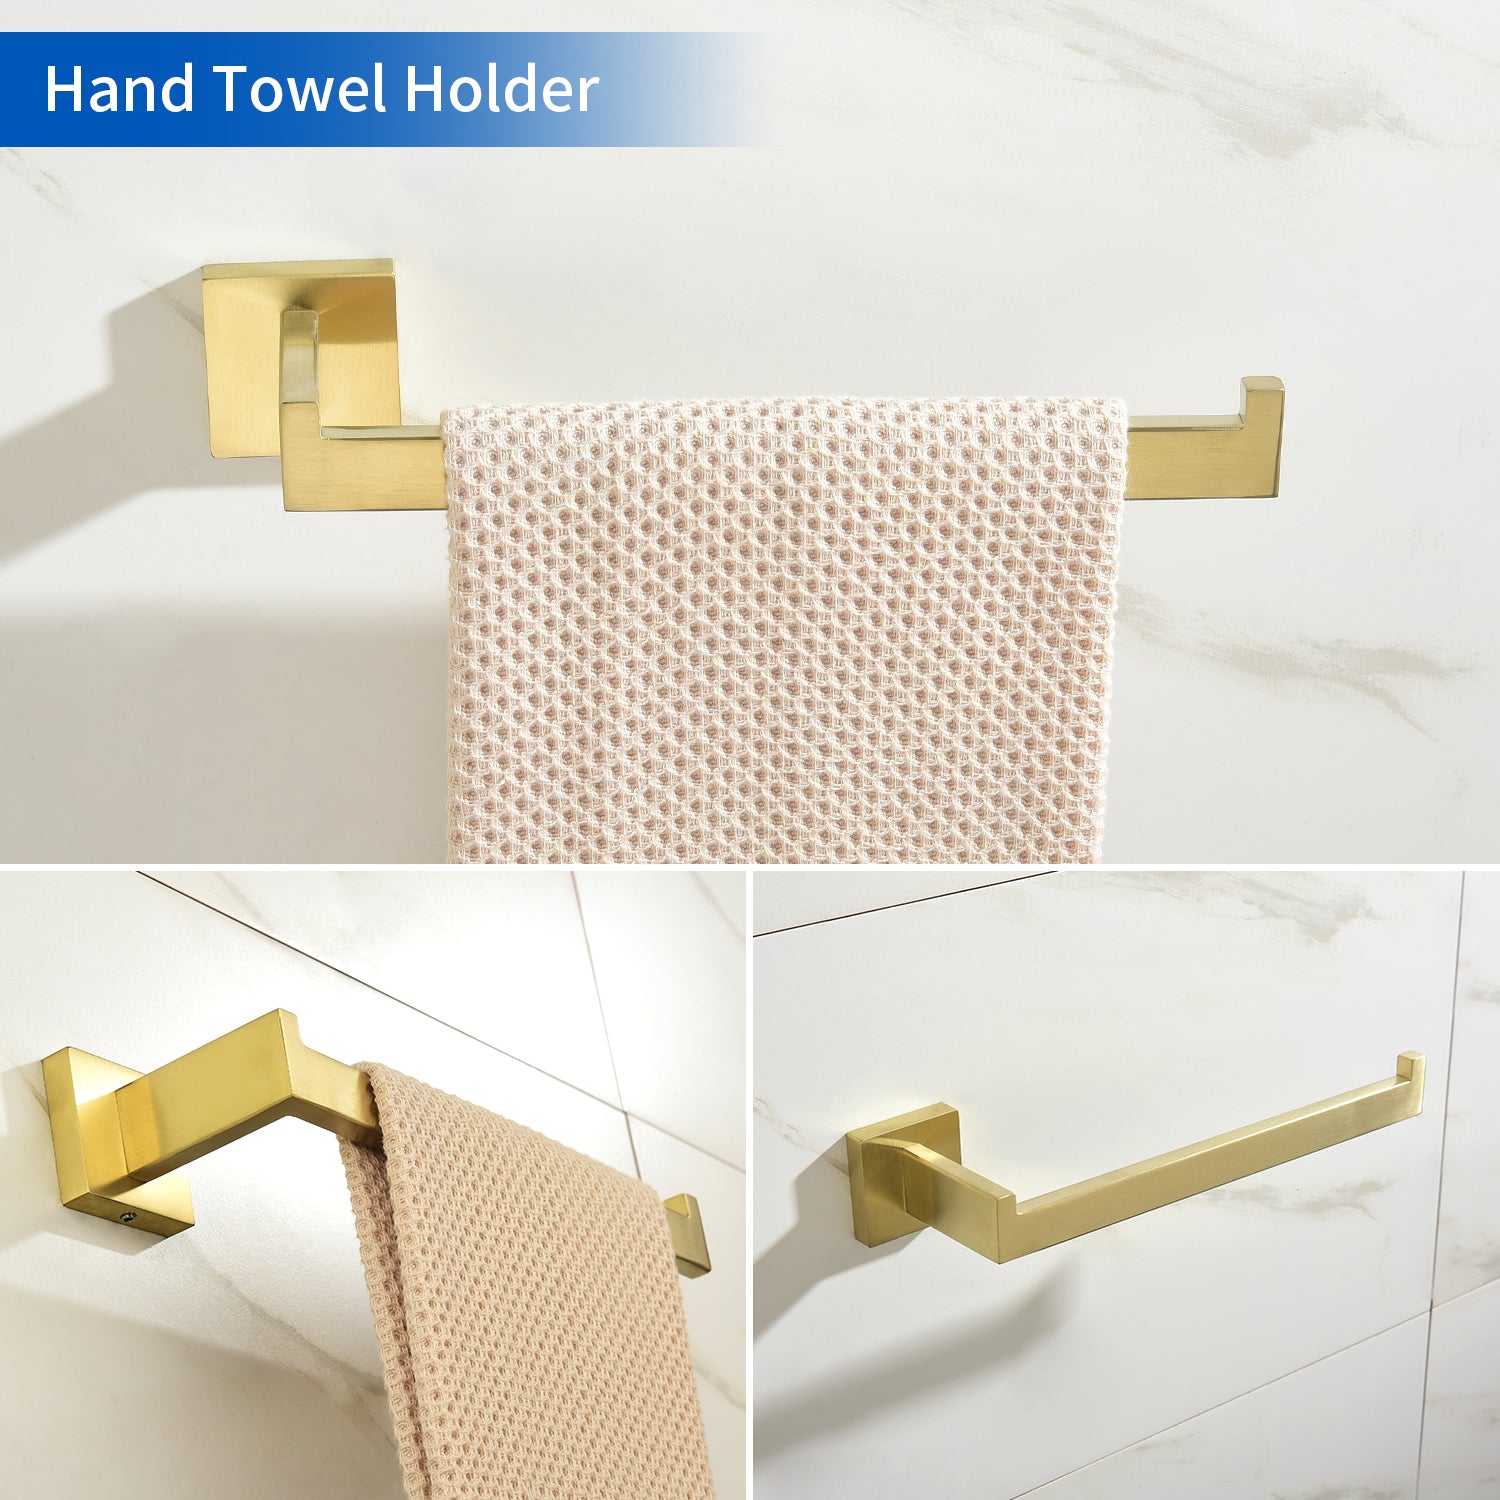 3-Pieces Gold Bathroom Hardware Set Stainless Steel Wall Mounted